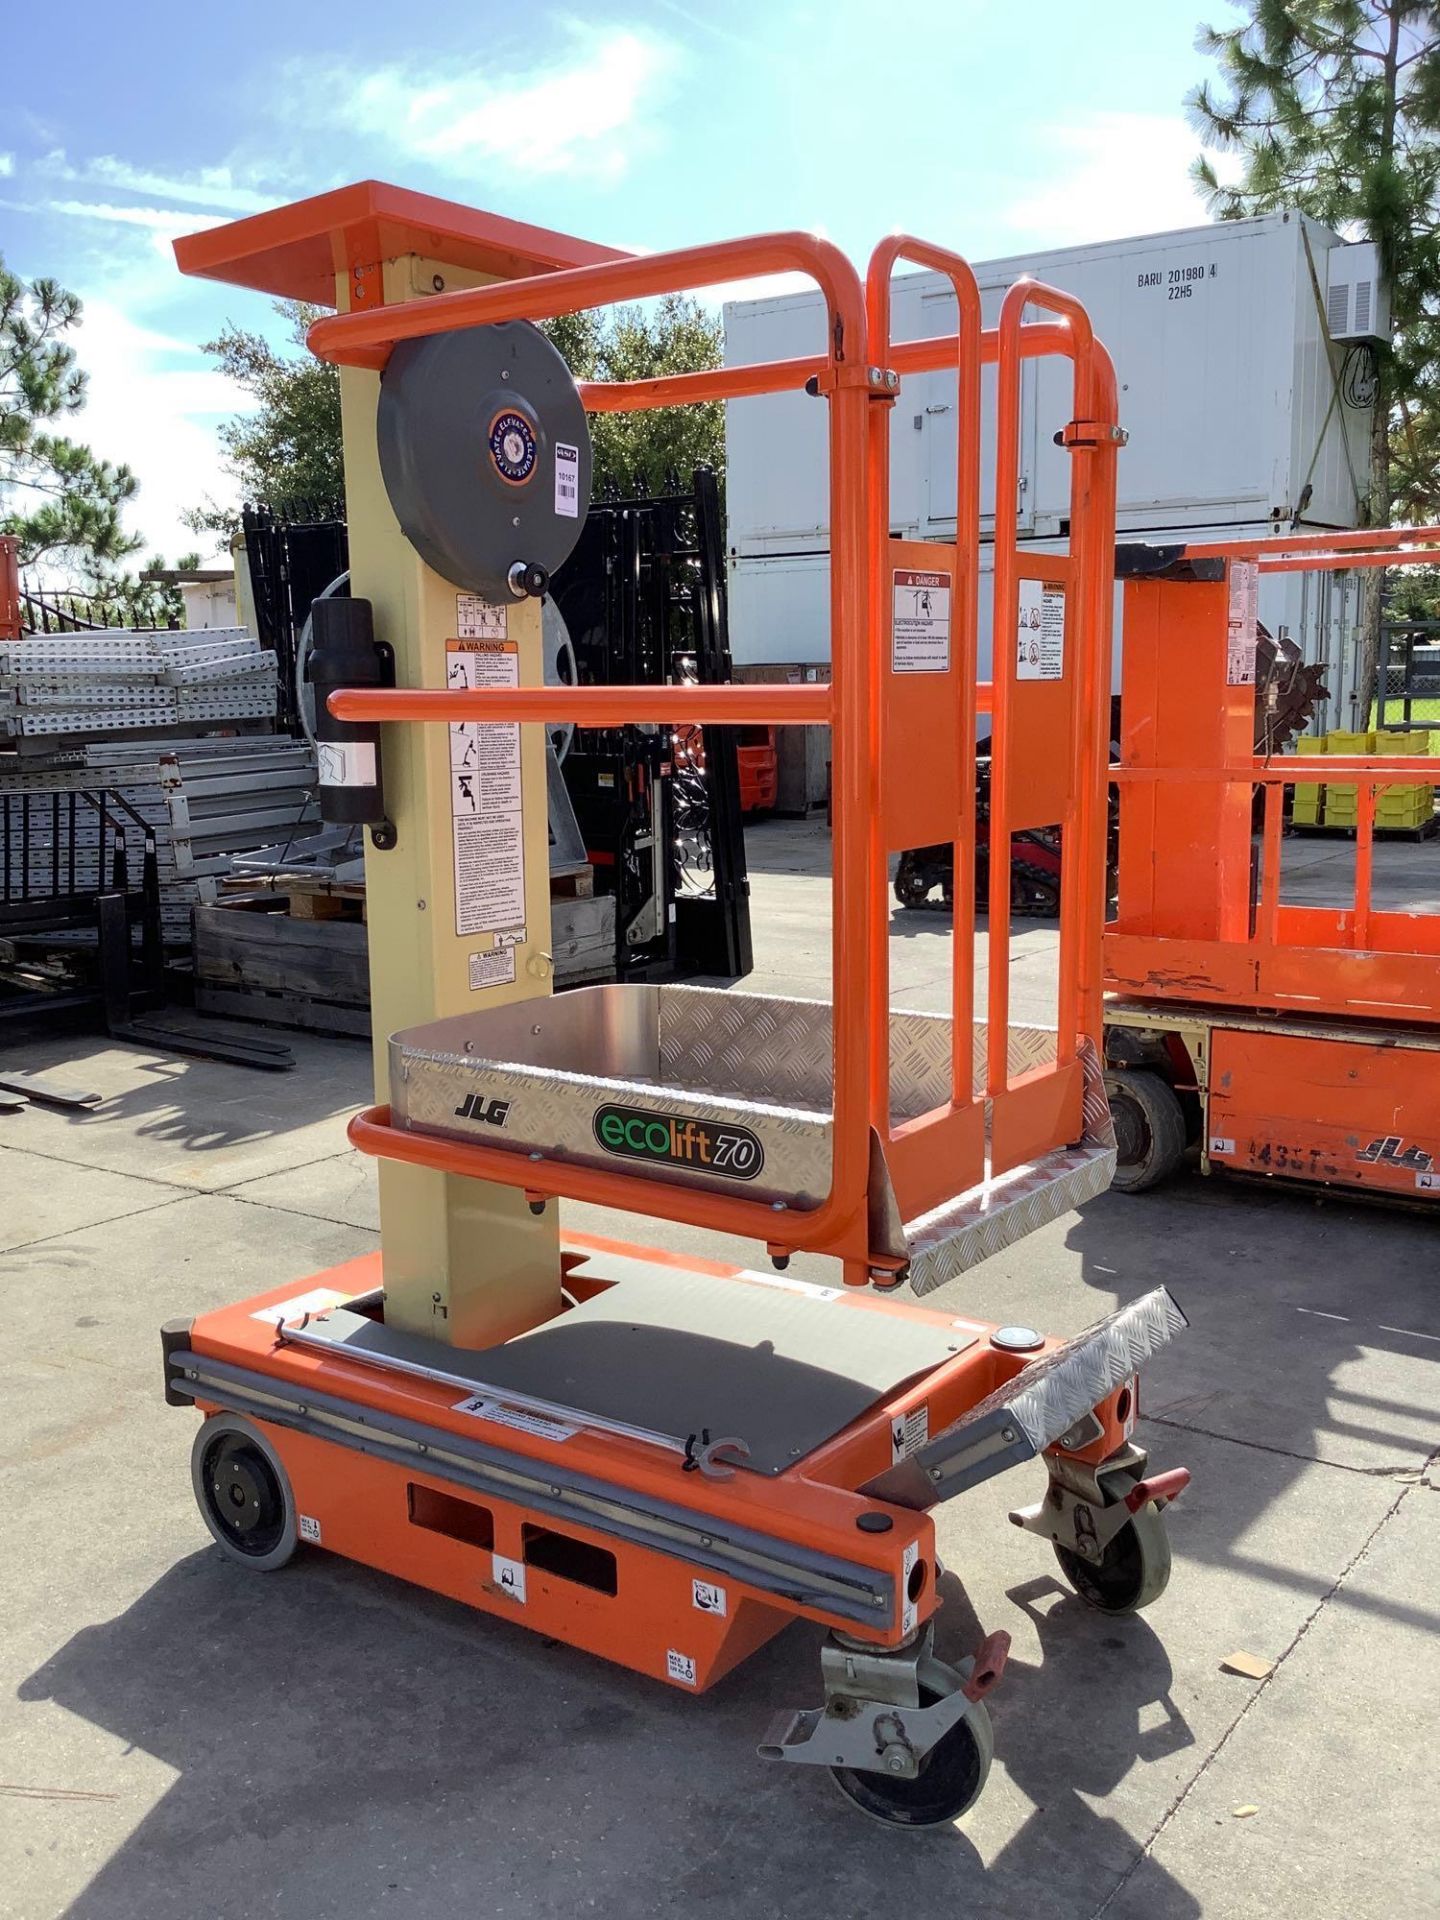 2018 JLG ECOLIFT 70,MANUAL, APPROX MAX PLATFORM HEIGHT 7FT, NON MARKING TIRES - Image 2 of 10